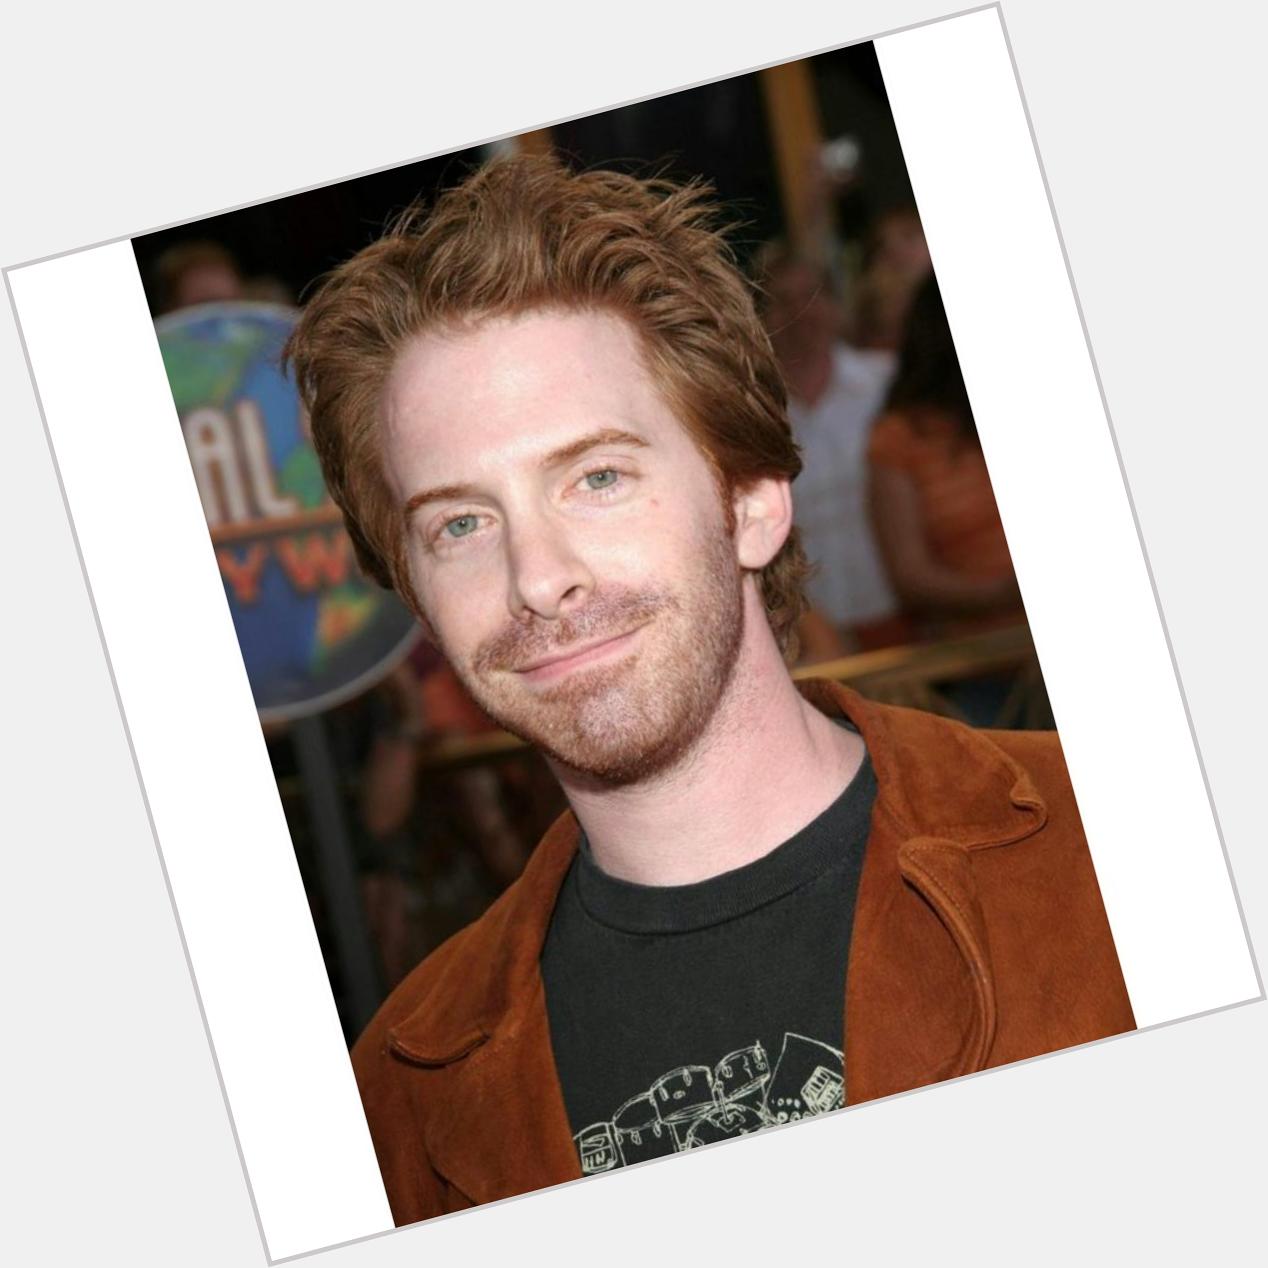  Happy birthday seth green i hope you have a great day your are the funniest person on the planet love ya 